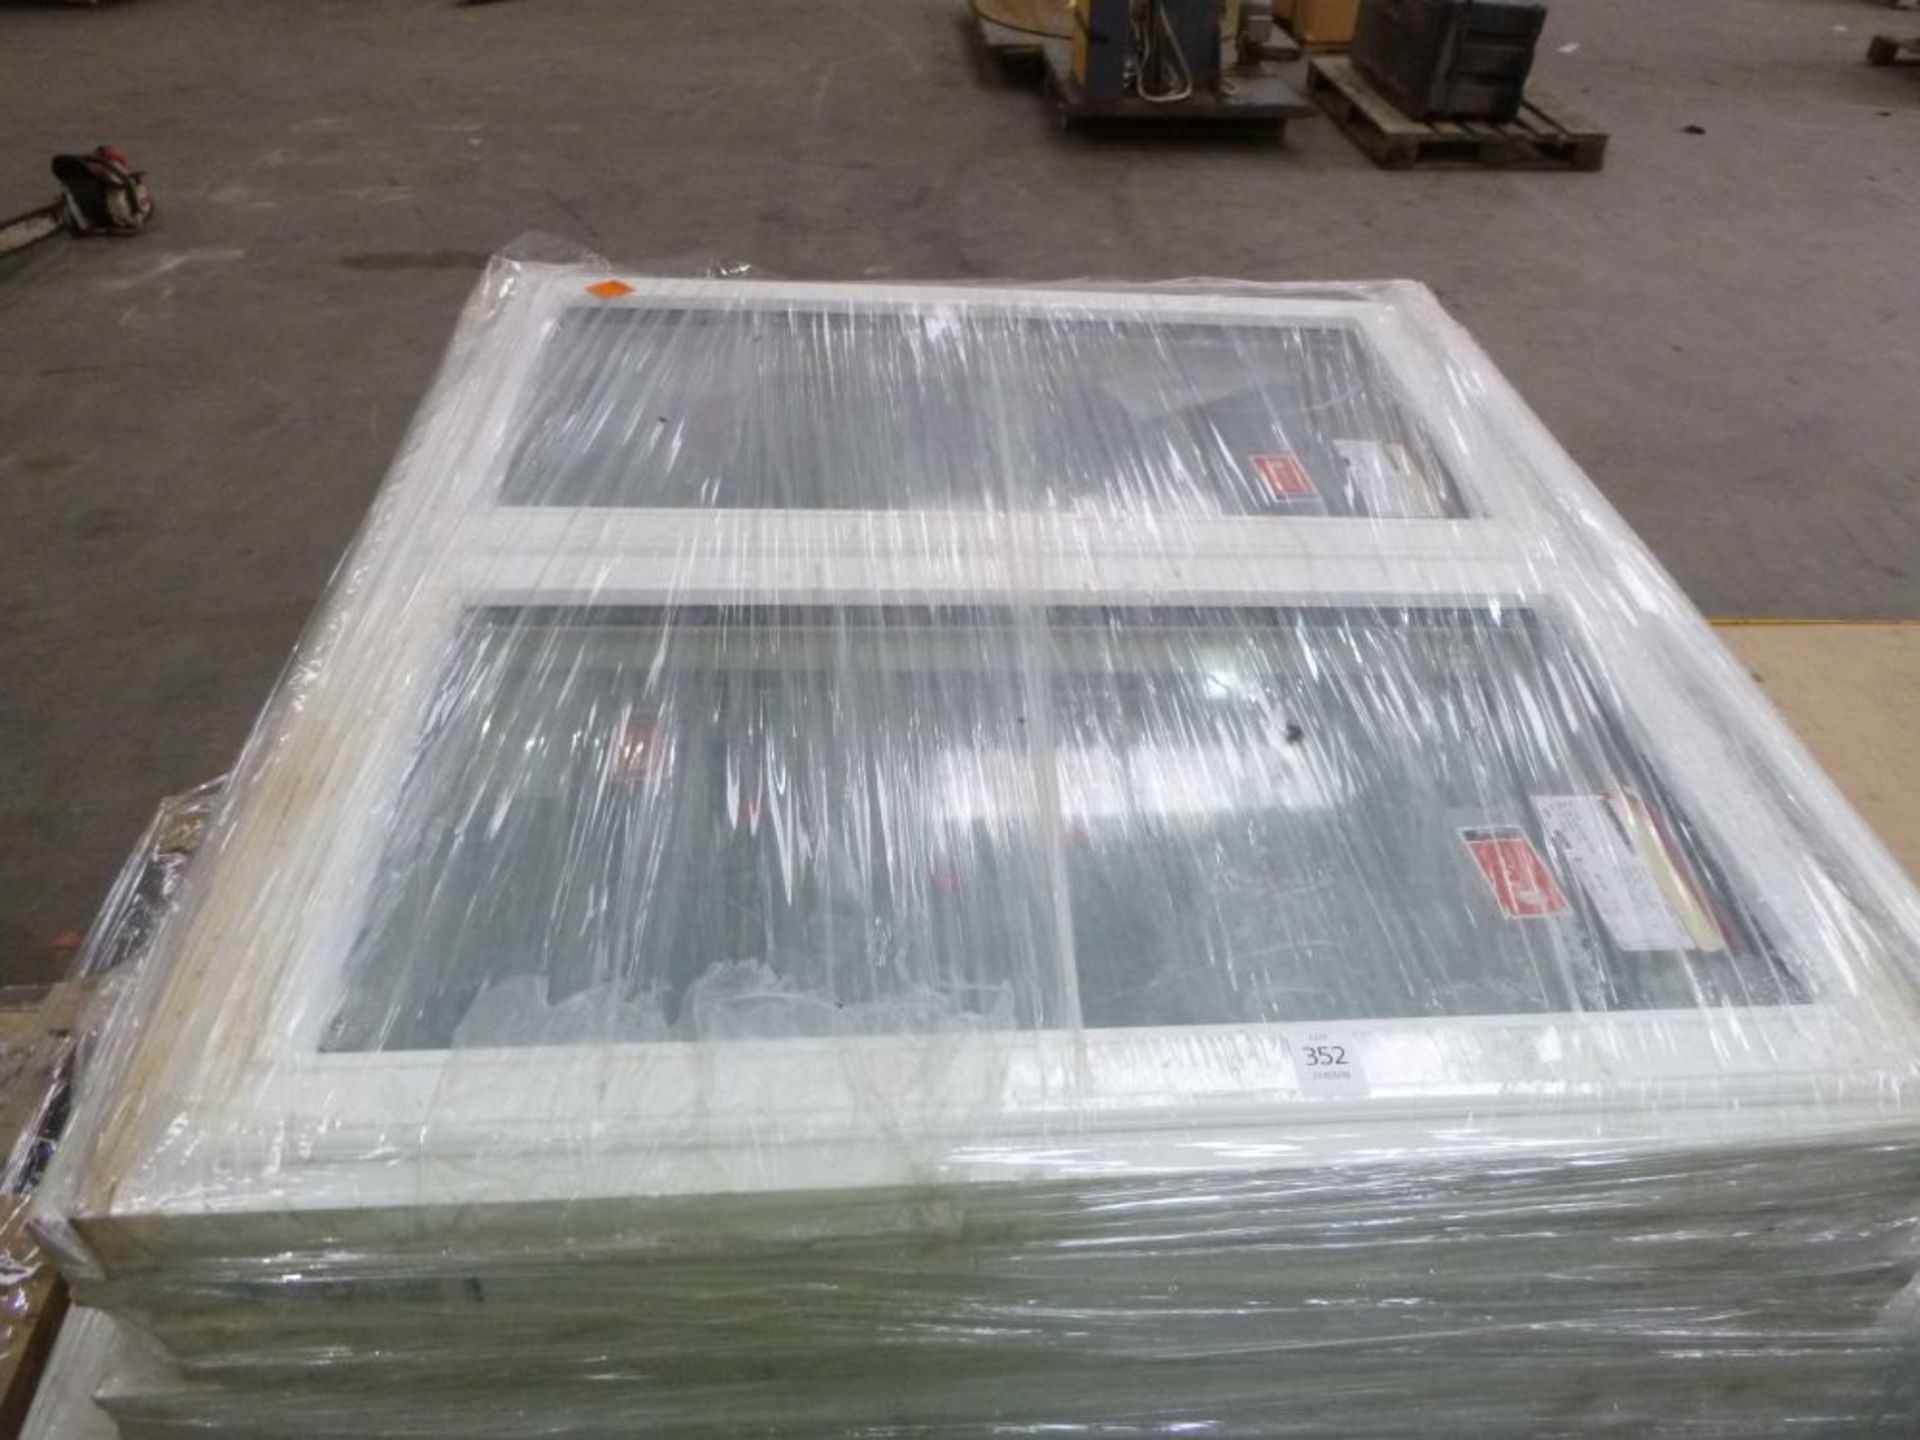 * 9 New and Unused High Quality Glazed Wooden Windows. A Pallet of 9 New and Unused High Quality - Image 2 of 3